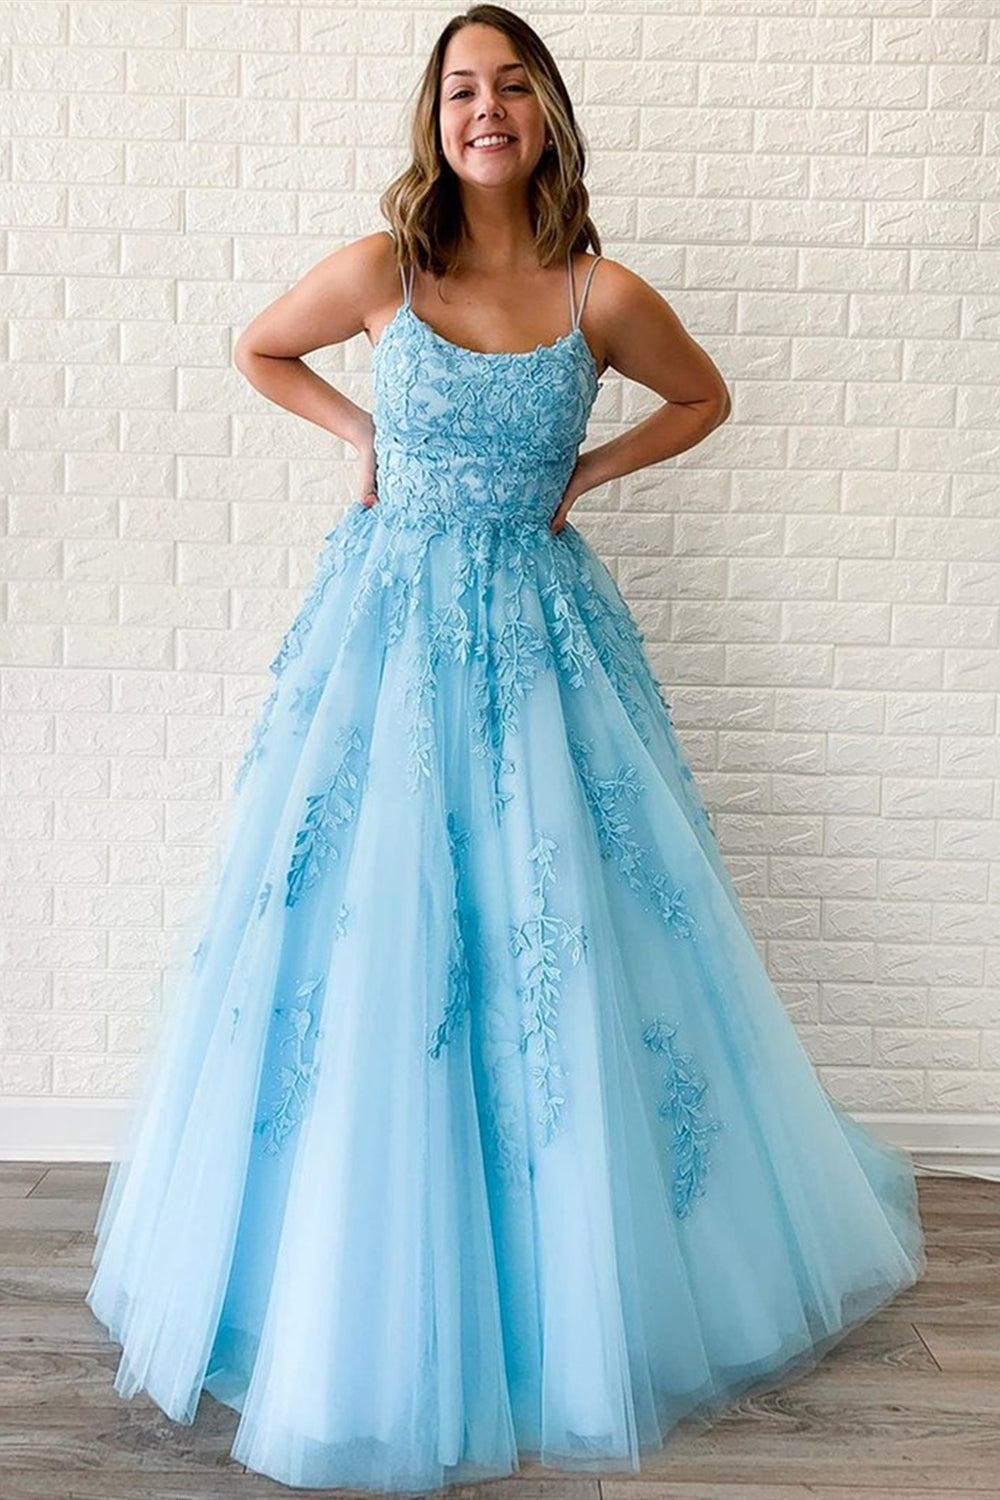 Buy Light Blue Ball Gown for Beautiful Photography Model Portfolio Fashion  Events Parties Perfect for Photo Shoots (X-Large) at Amazon.in